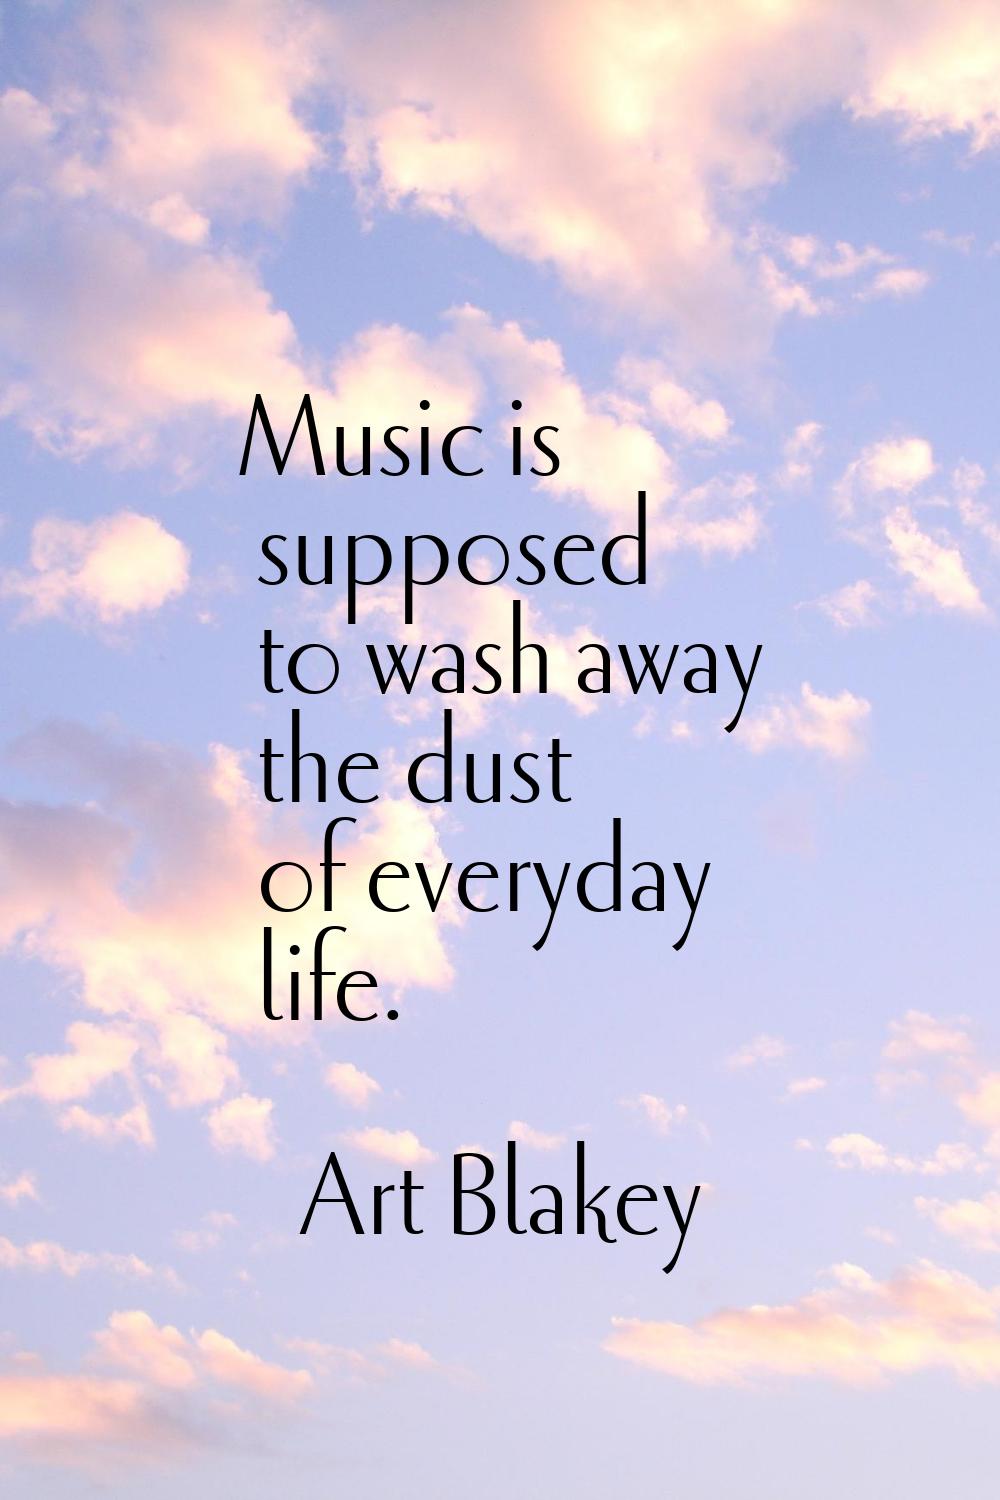 Music is supposed to wash away the dust of everyday life.